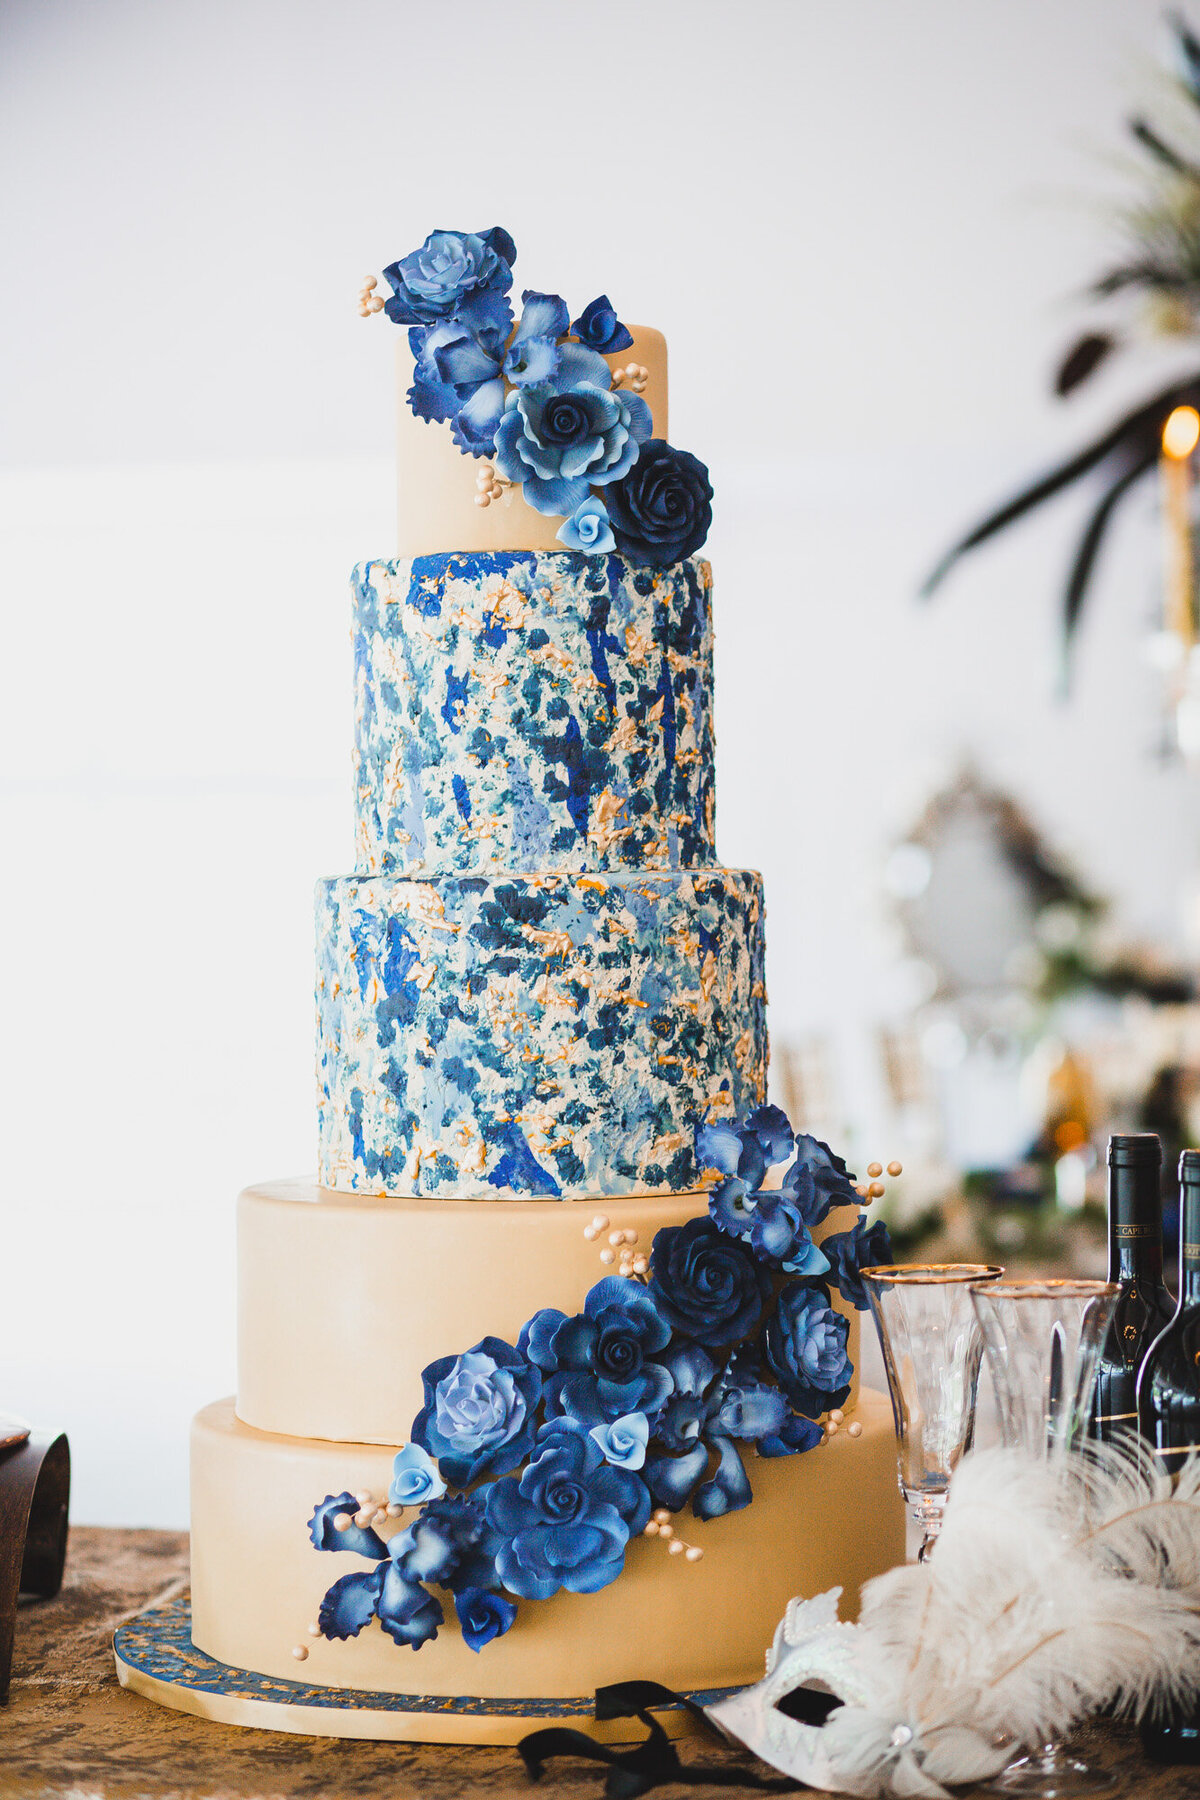 Elegant five tier cake with blue and floral details